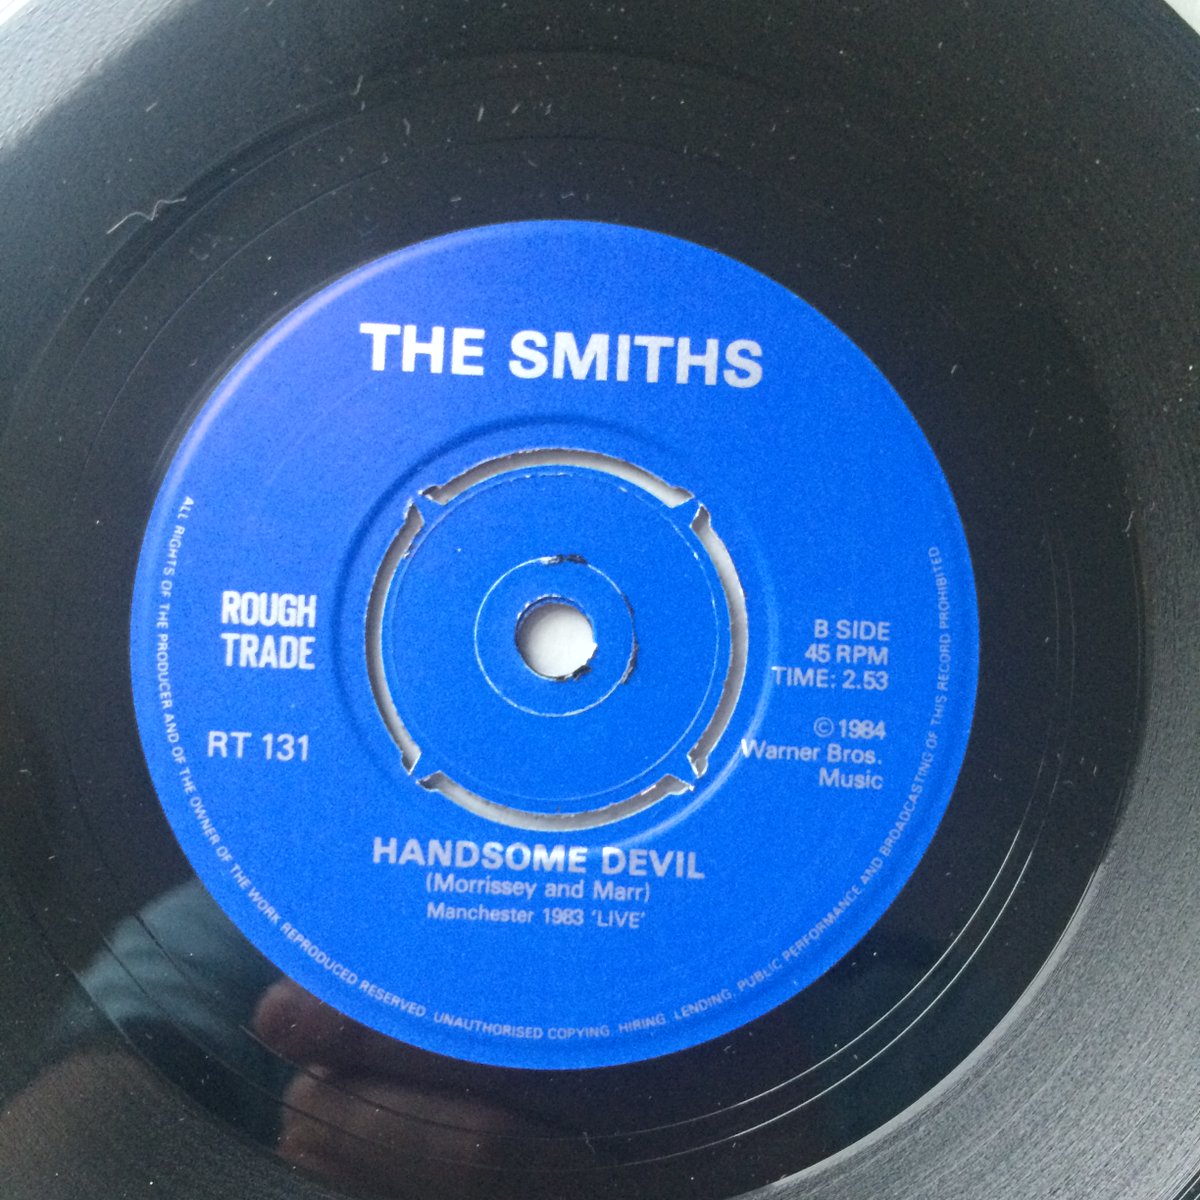 May 1983 - and so it begins... The Smiths release their debut single, 'Hand in Glove'. Life would never be the same again. #TheSmiths